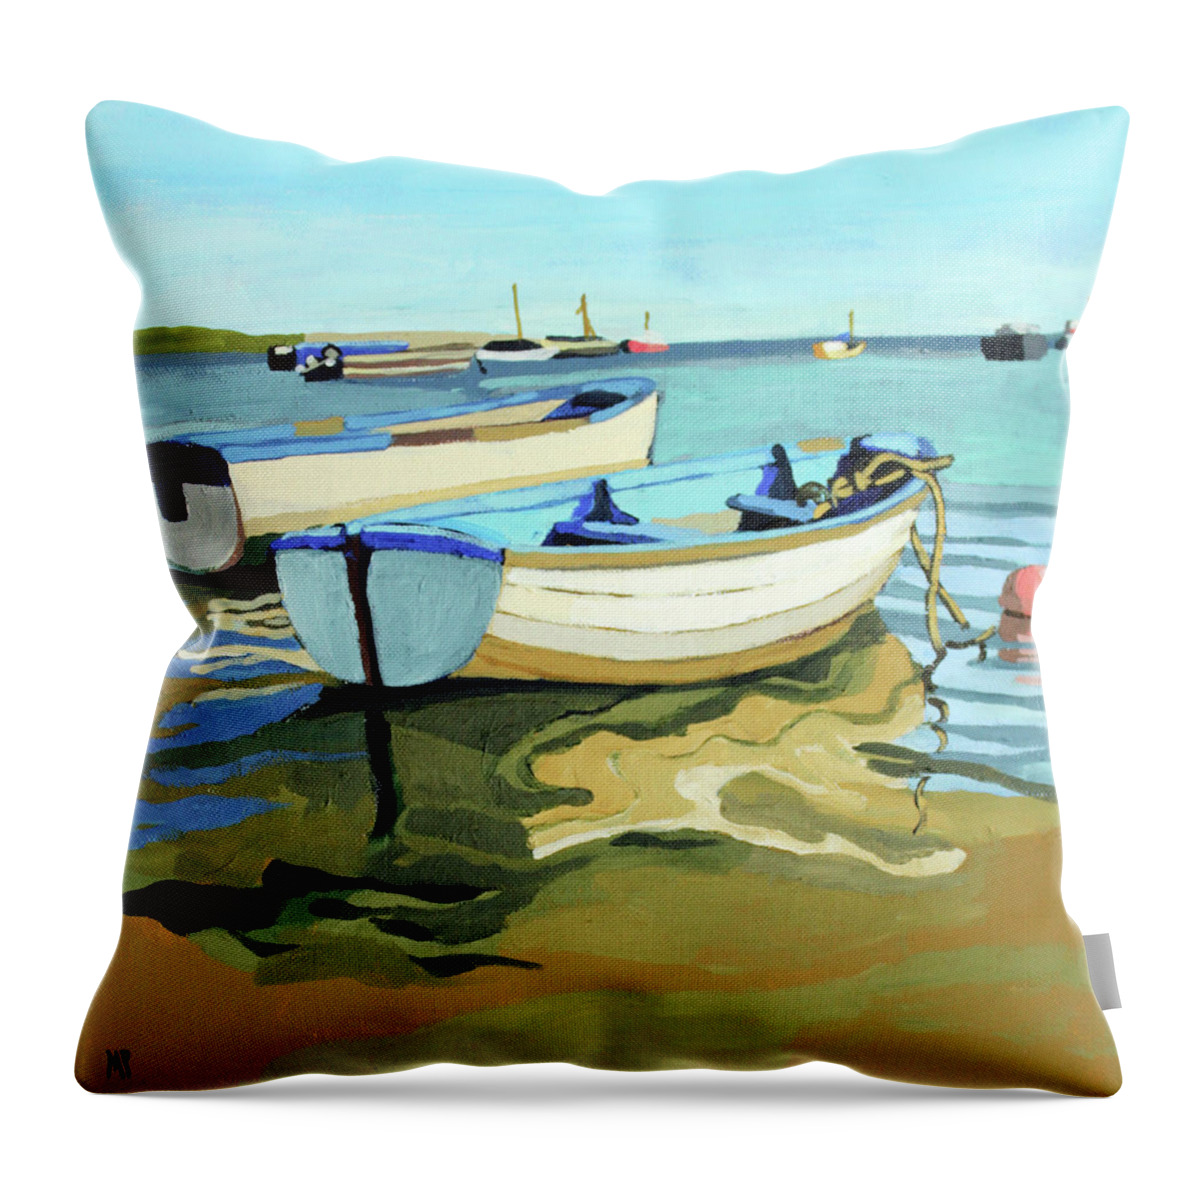 Boats Throw Pillow featuring the painting The Blue Boats by Melinda Patrick